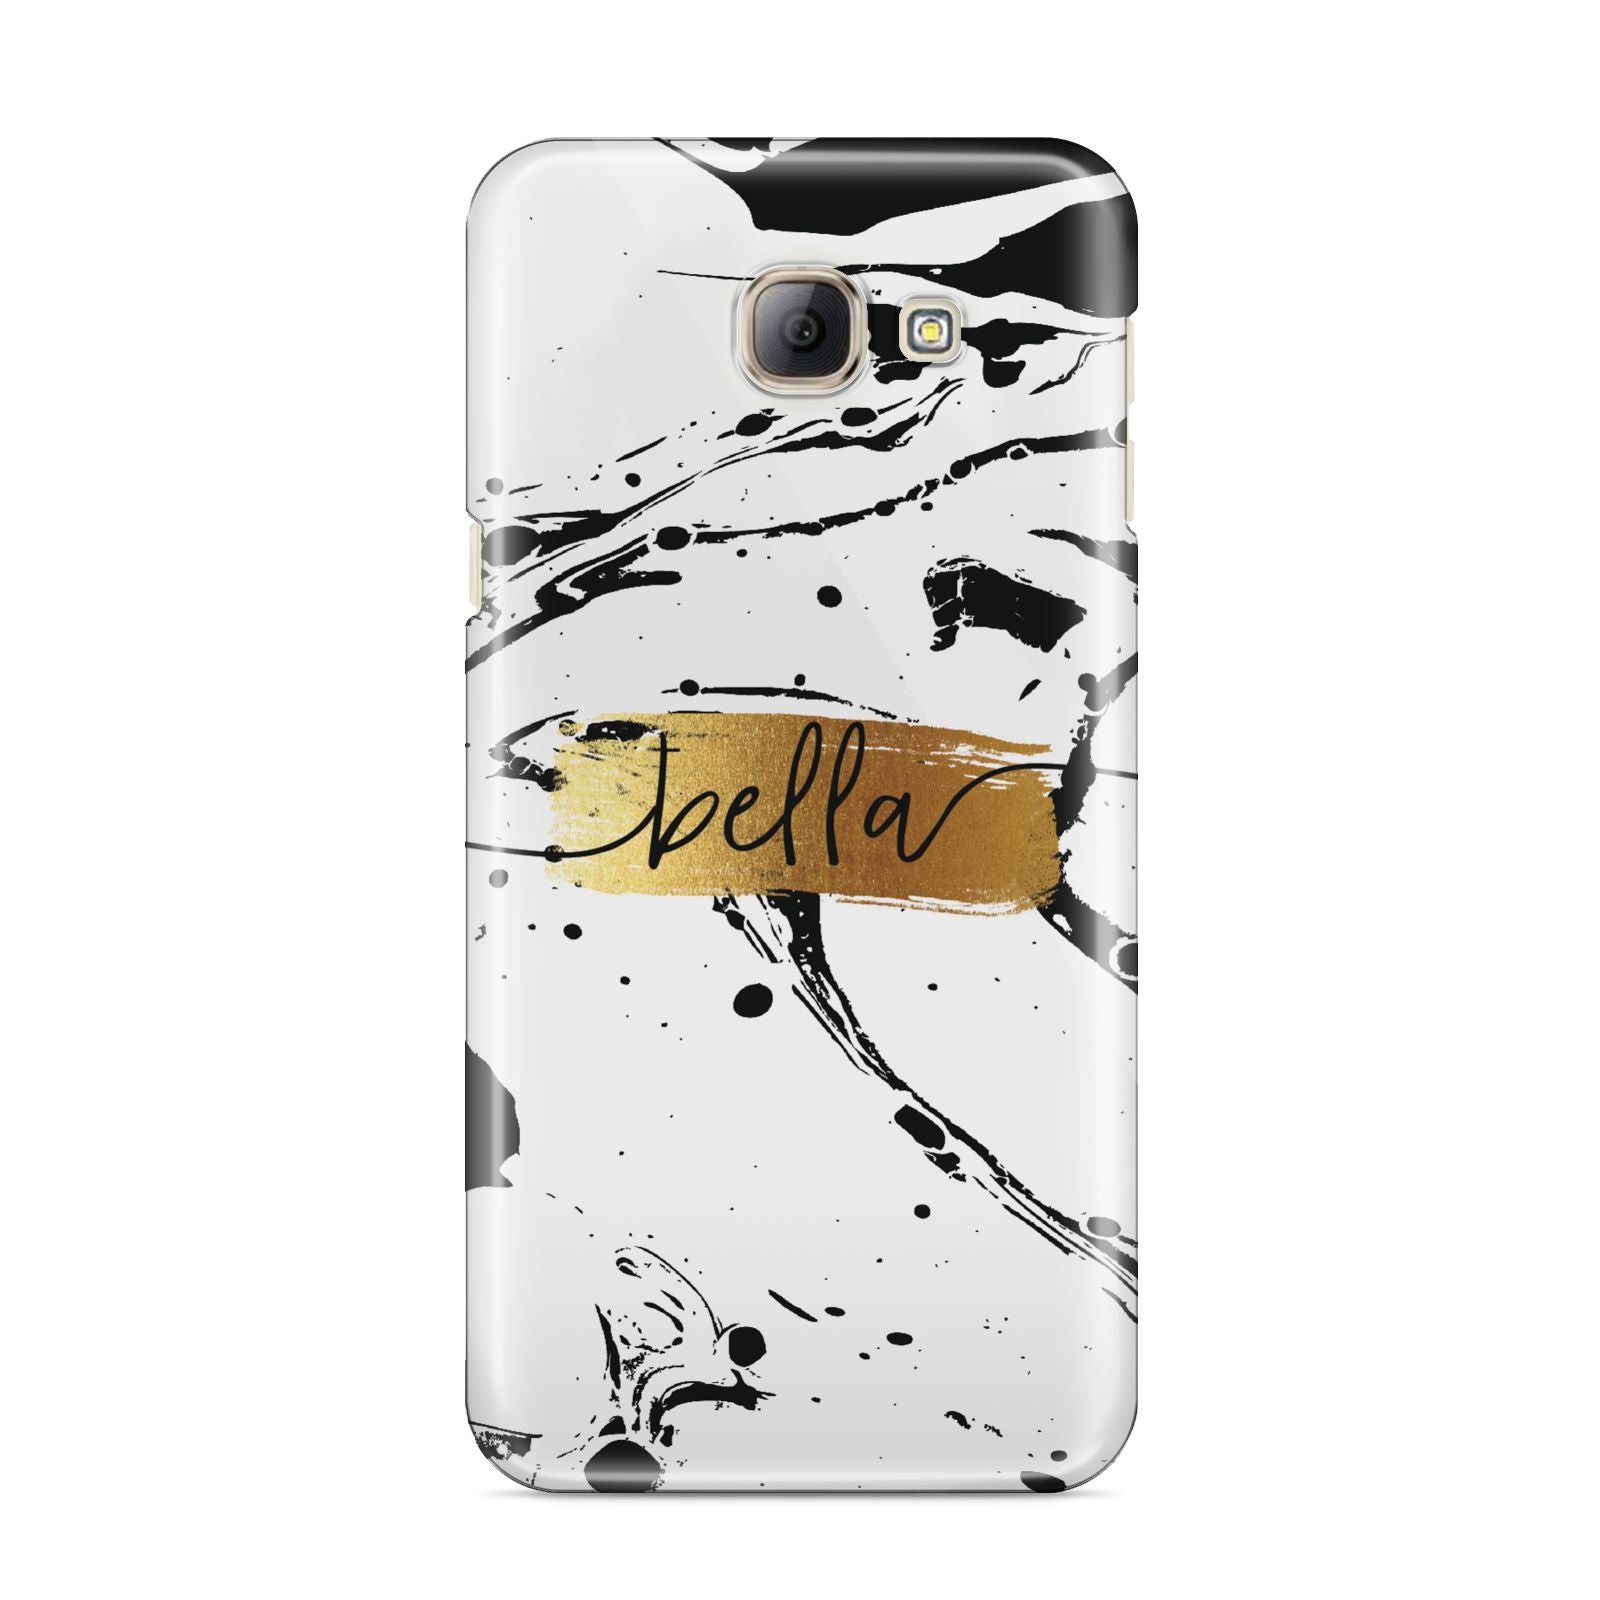 Personalised White Gold Swirl Marble Samsung Galaxy A8 2016 Case